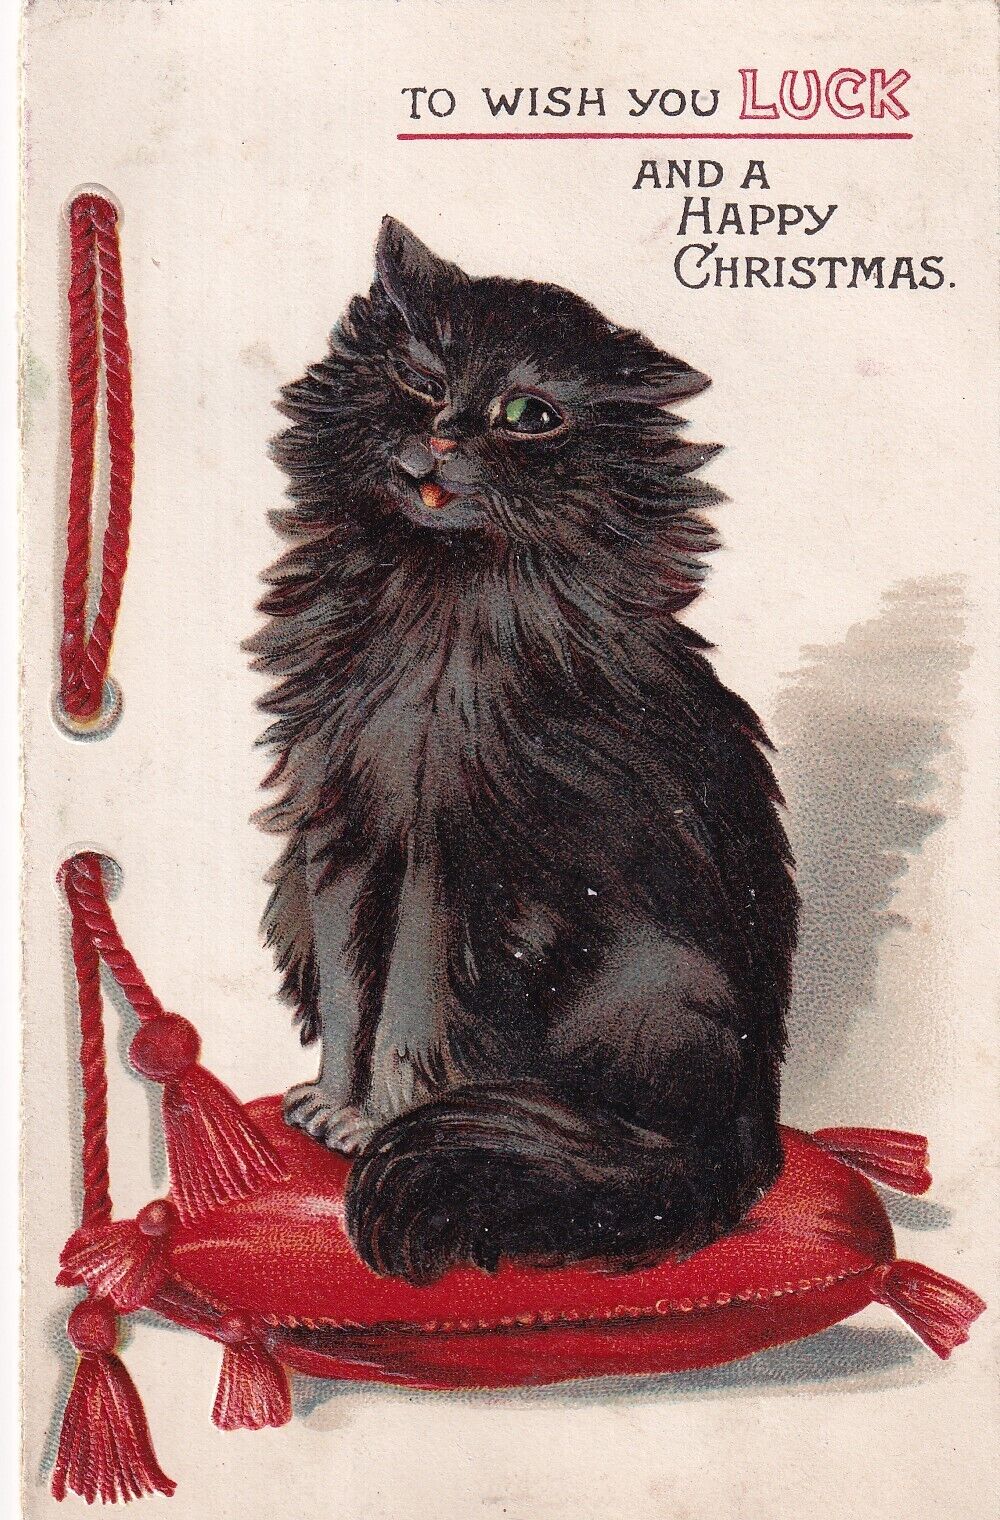 Black cat sits on red cushion, Louis Wain ?, Christmas greeting